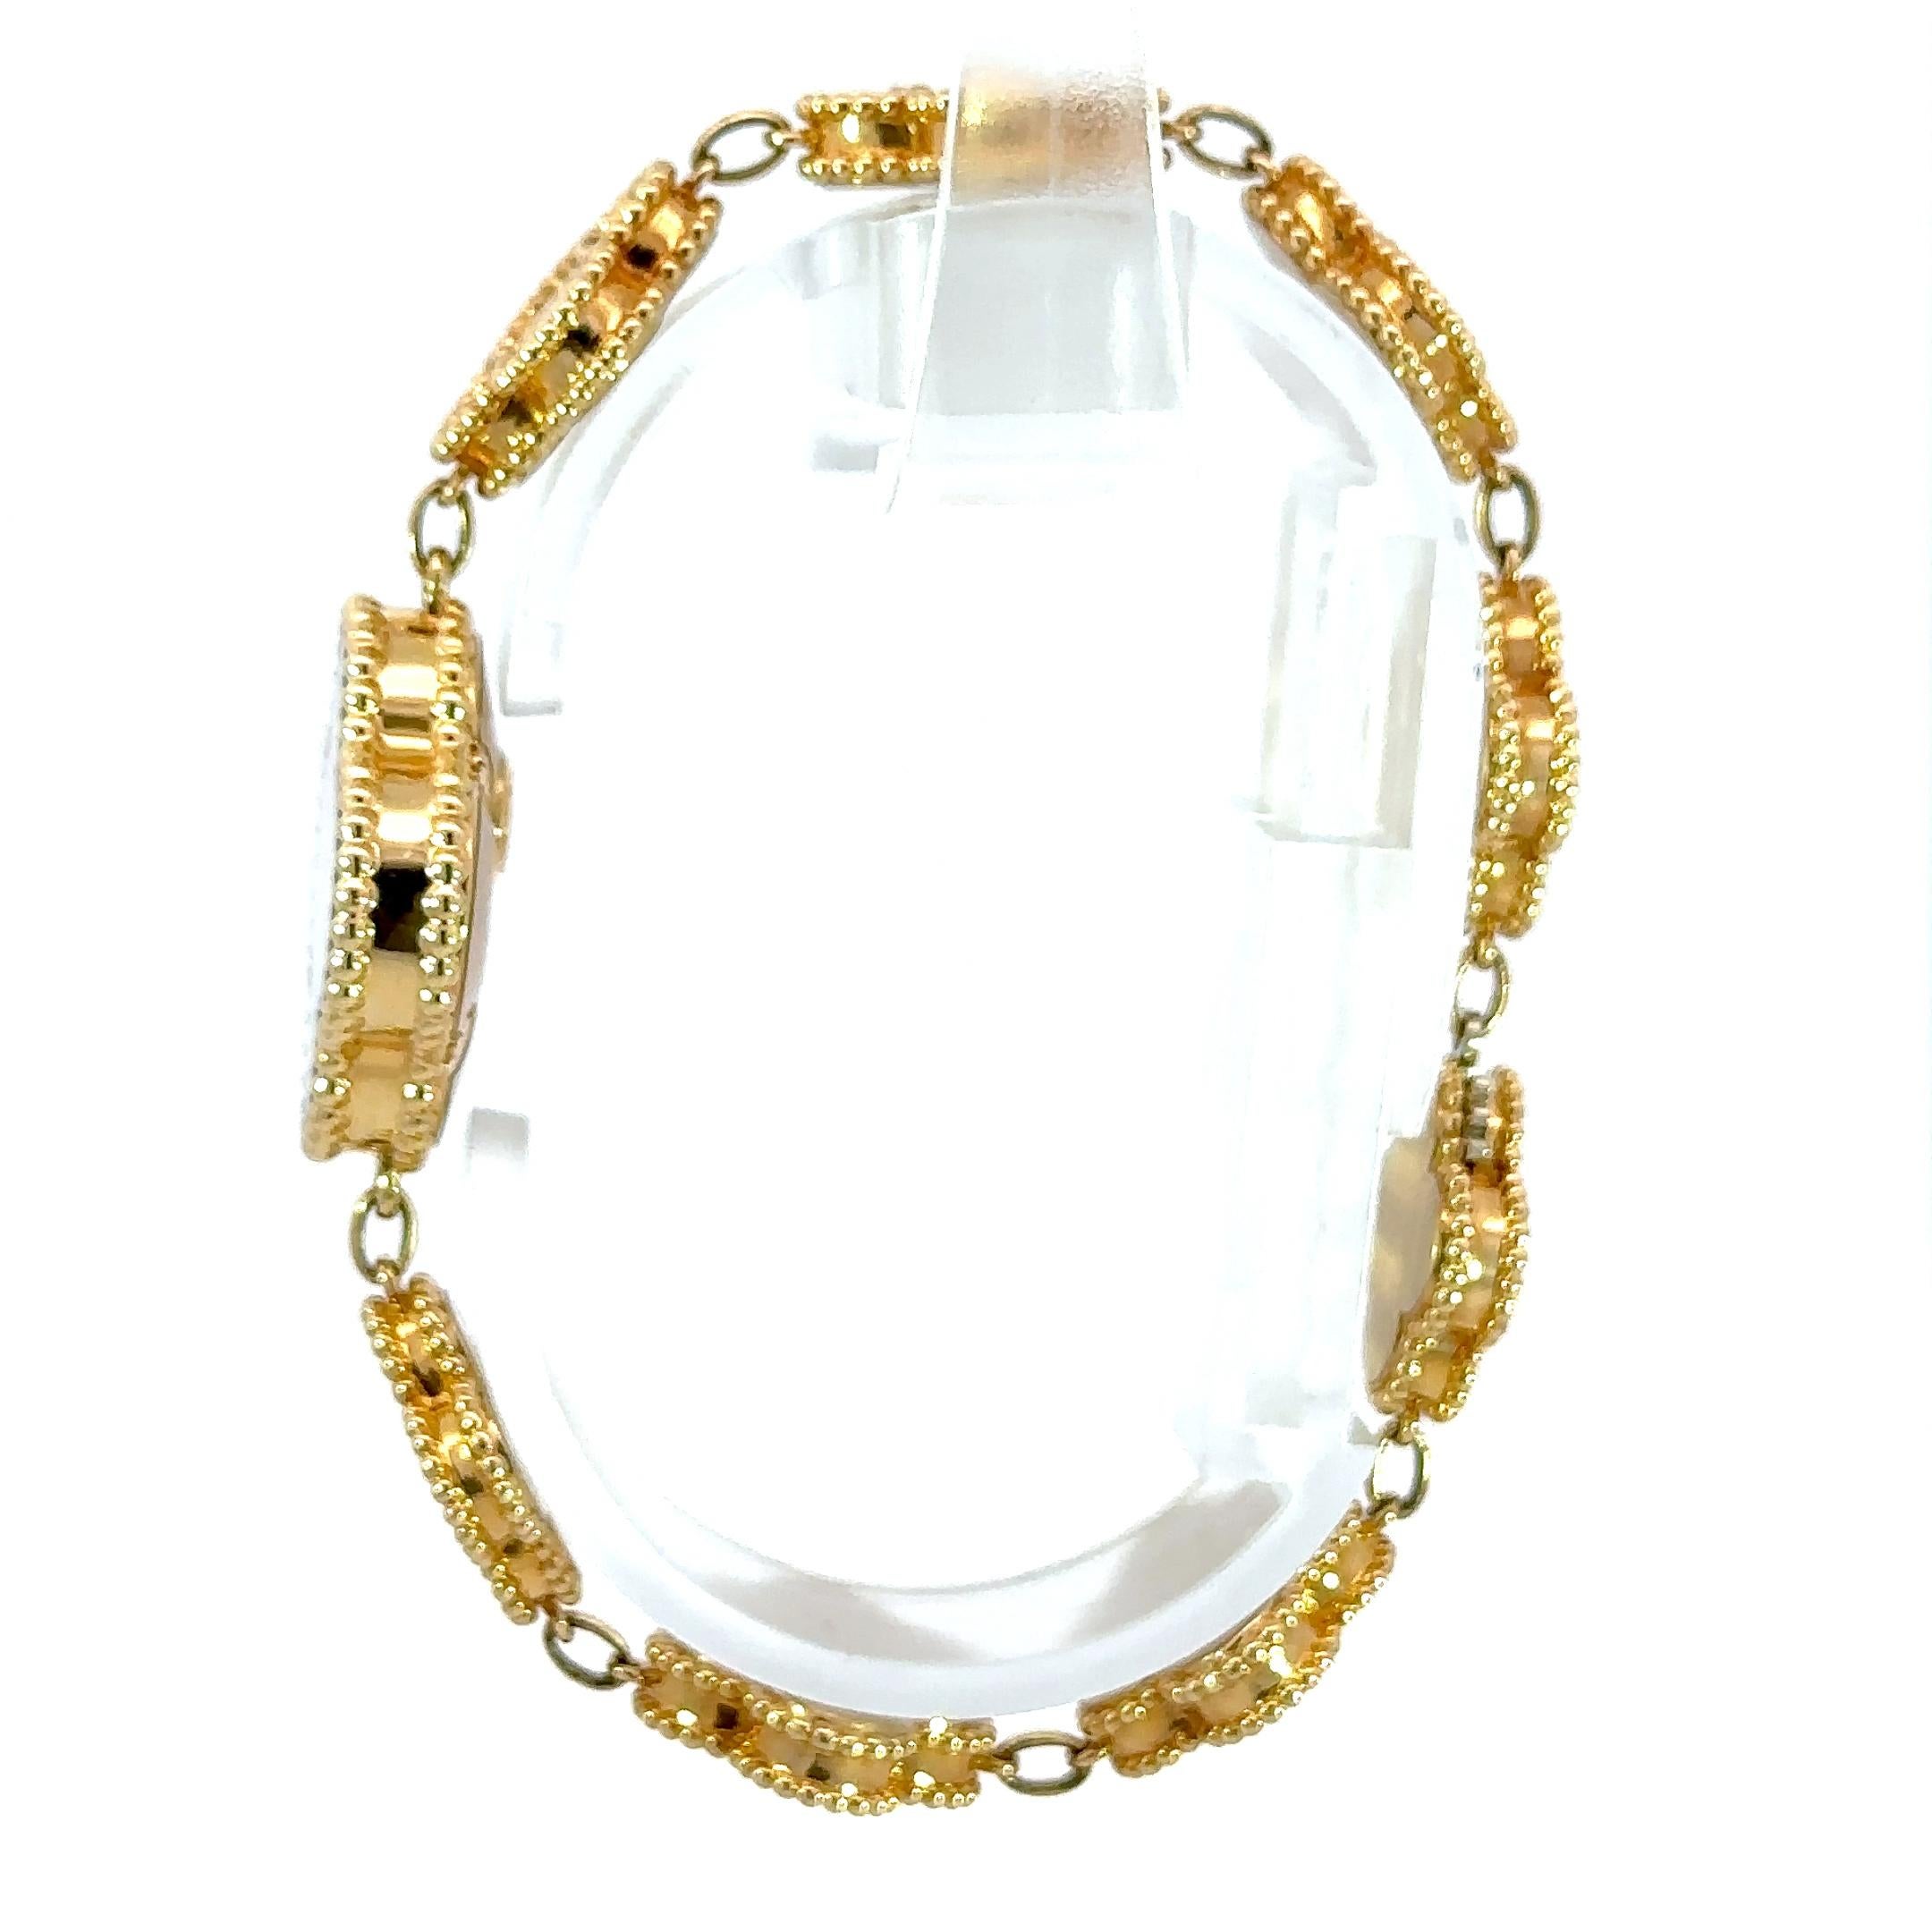 Contemporary Van Cleef & Arpels Sweet Alhambra Watch 18K Yellow Gold and Diamonds